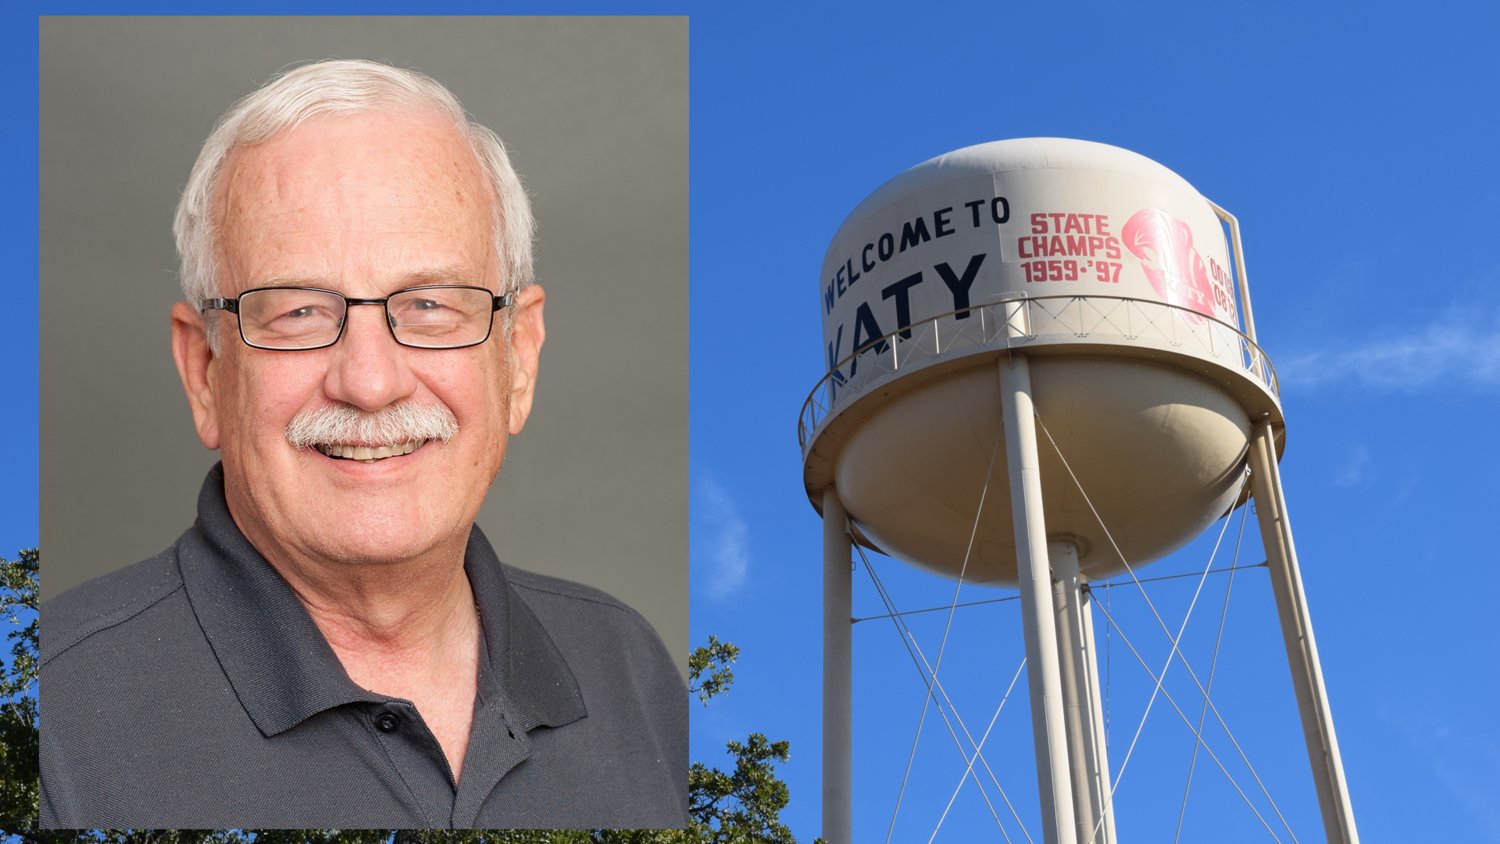 Dr. Mark Bing recently passed due to Fragile X Tremor and Ataxia Syndrome while surrounded by family. Bing was passionate about his family, practicing medicine and keeping Katy healthy and served as Katy's medical director and a variety of functions supporting Katy ISD and its students.